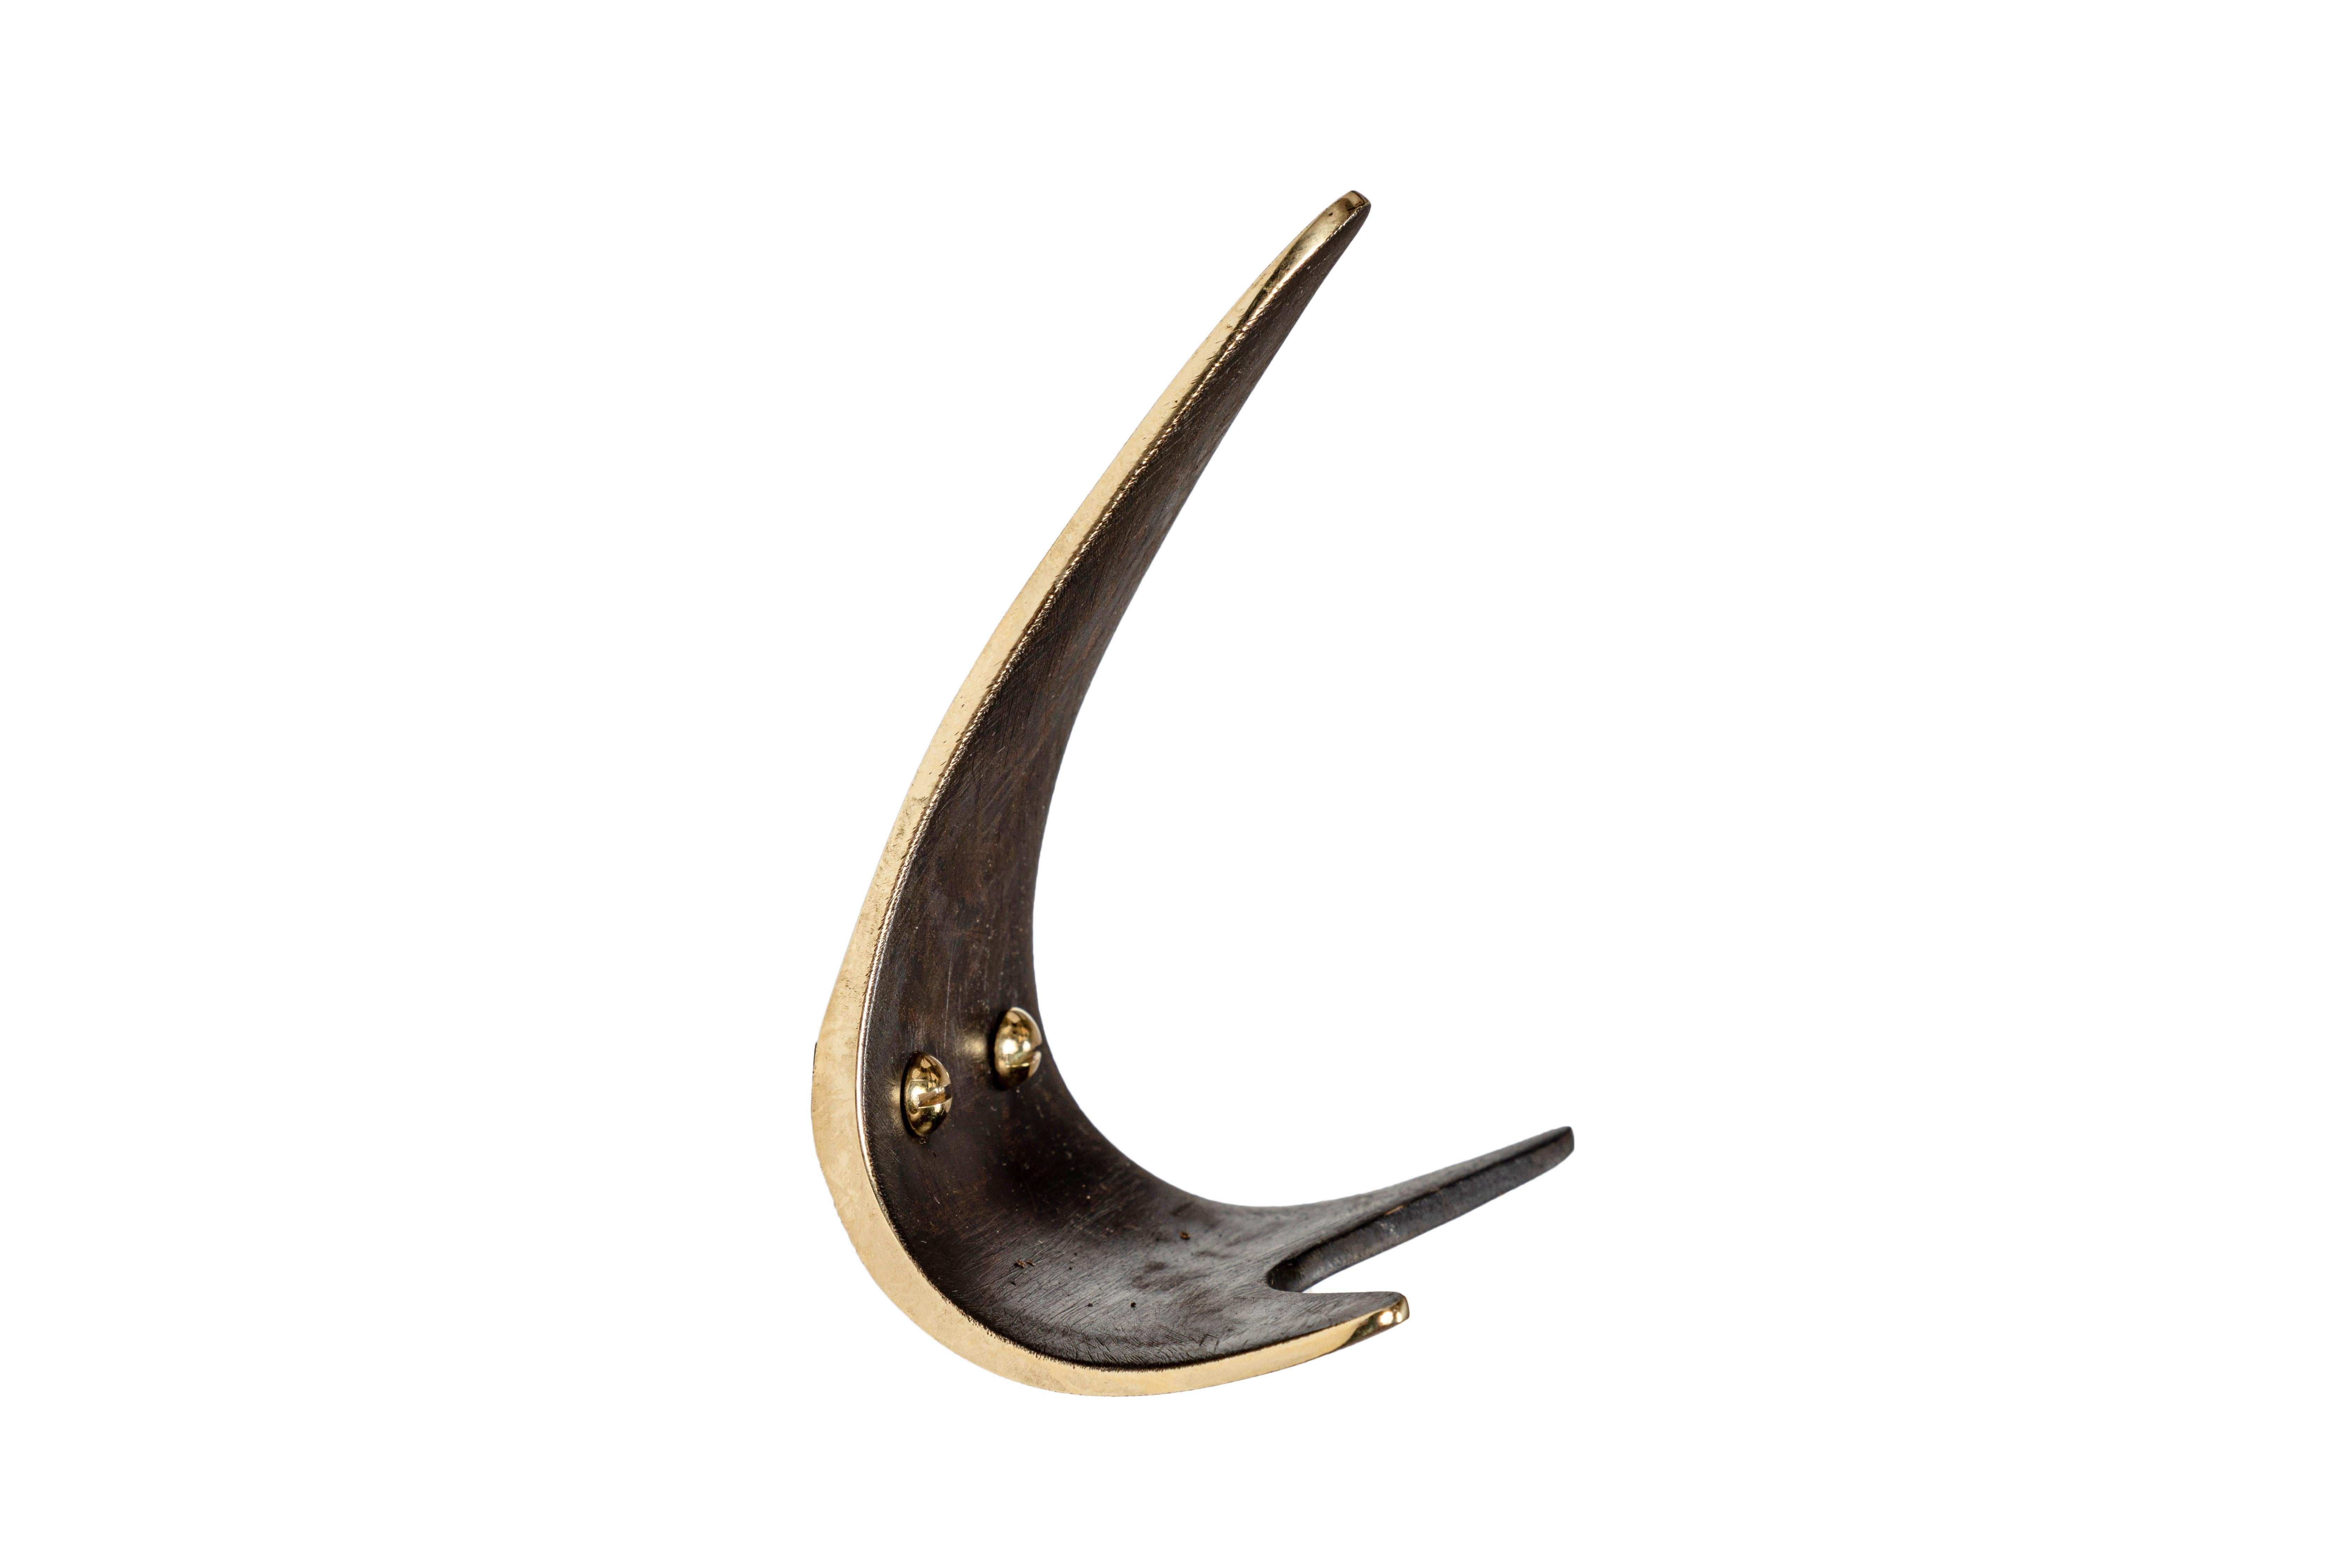 Carl Auböck brass #5439 patinated brass hook. Designed in the 1950s, this versatile and Minimalist Viennese hook is executed in polished and patinated brass by Werkstätte Carl Auböck, Austria. 

Price is per item. Two in stock ready to ship.